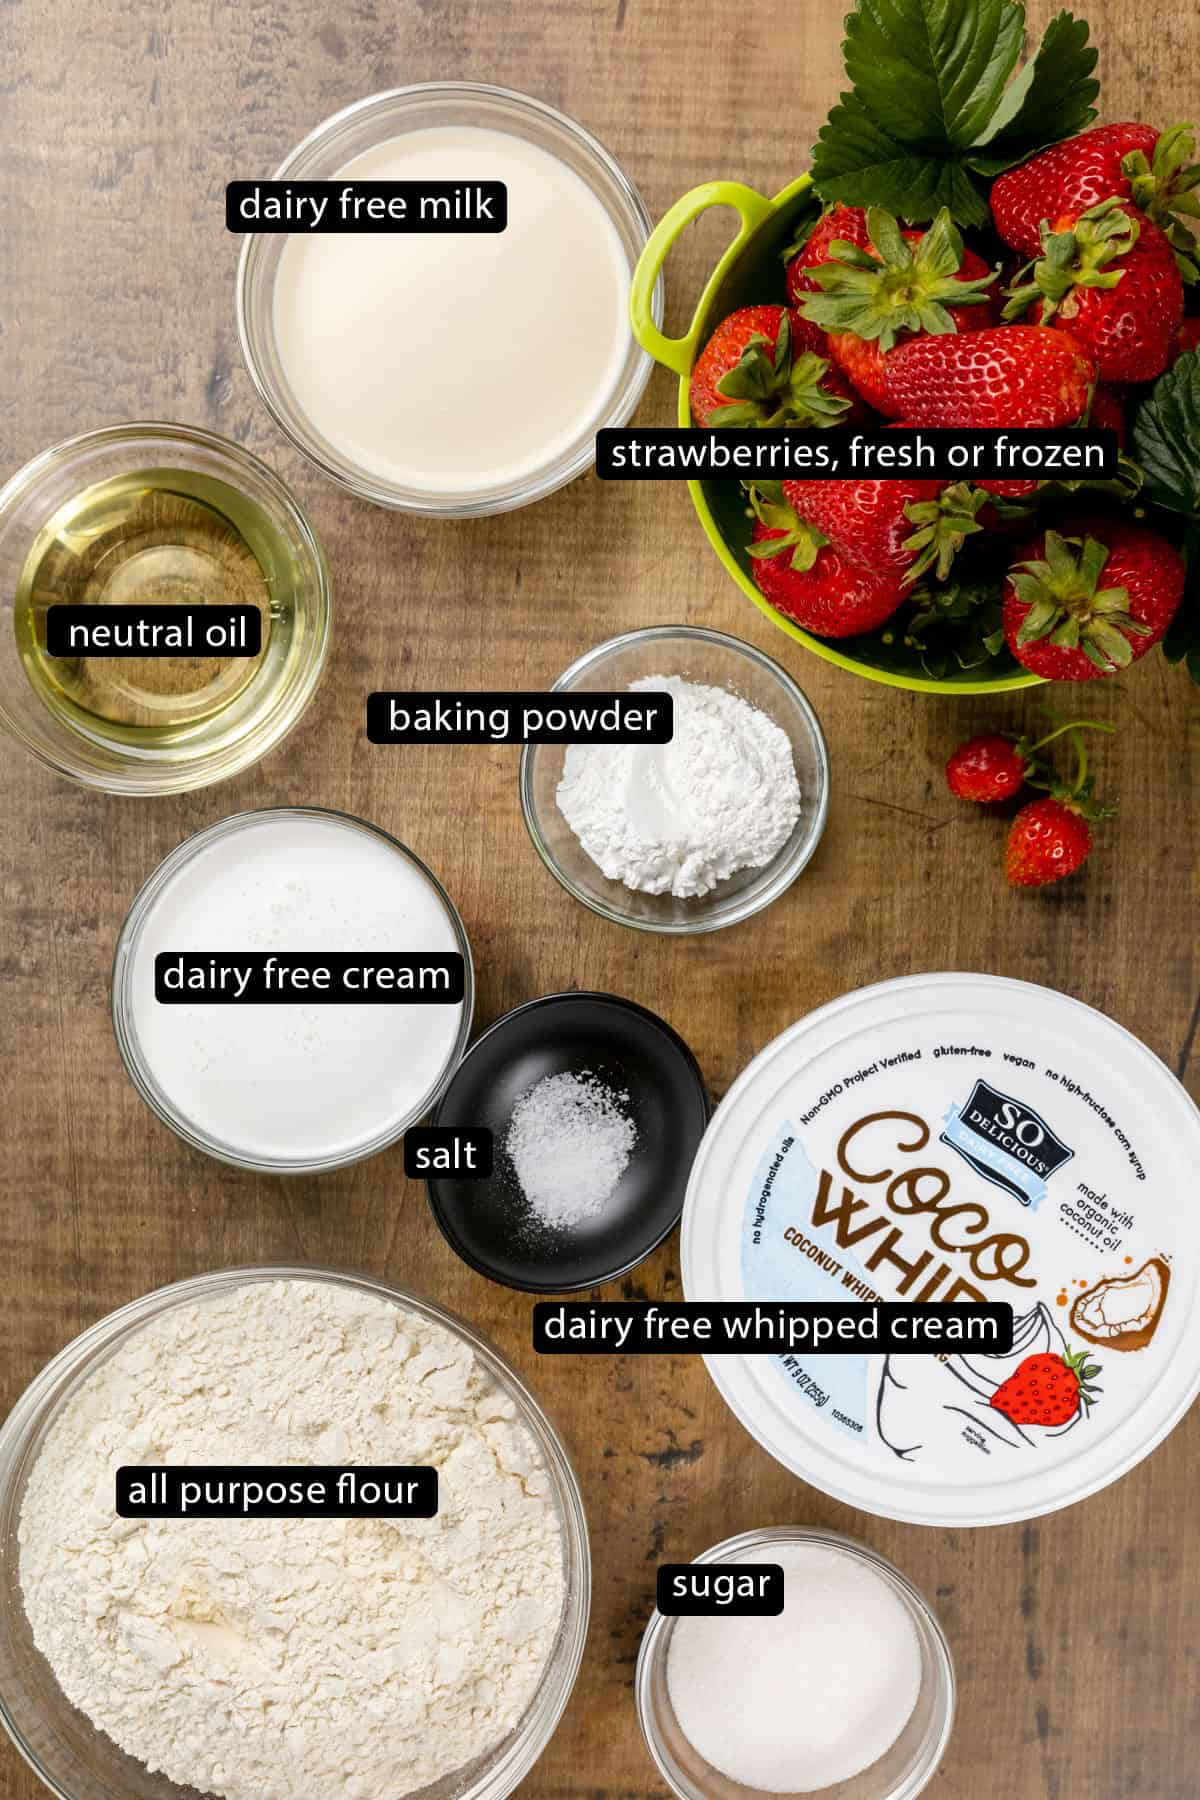 Ingredients for vegan strawberry shortcakes in various glass bowls on a wood tabletop. Black and white labels have been added to name each ingredient like flour, sugar, and baking powder.